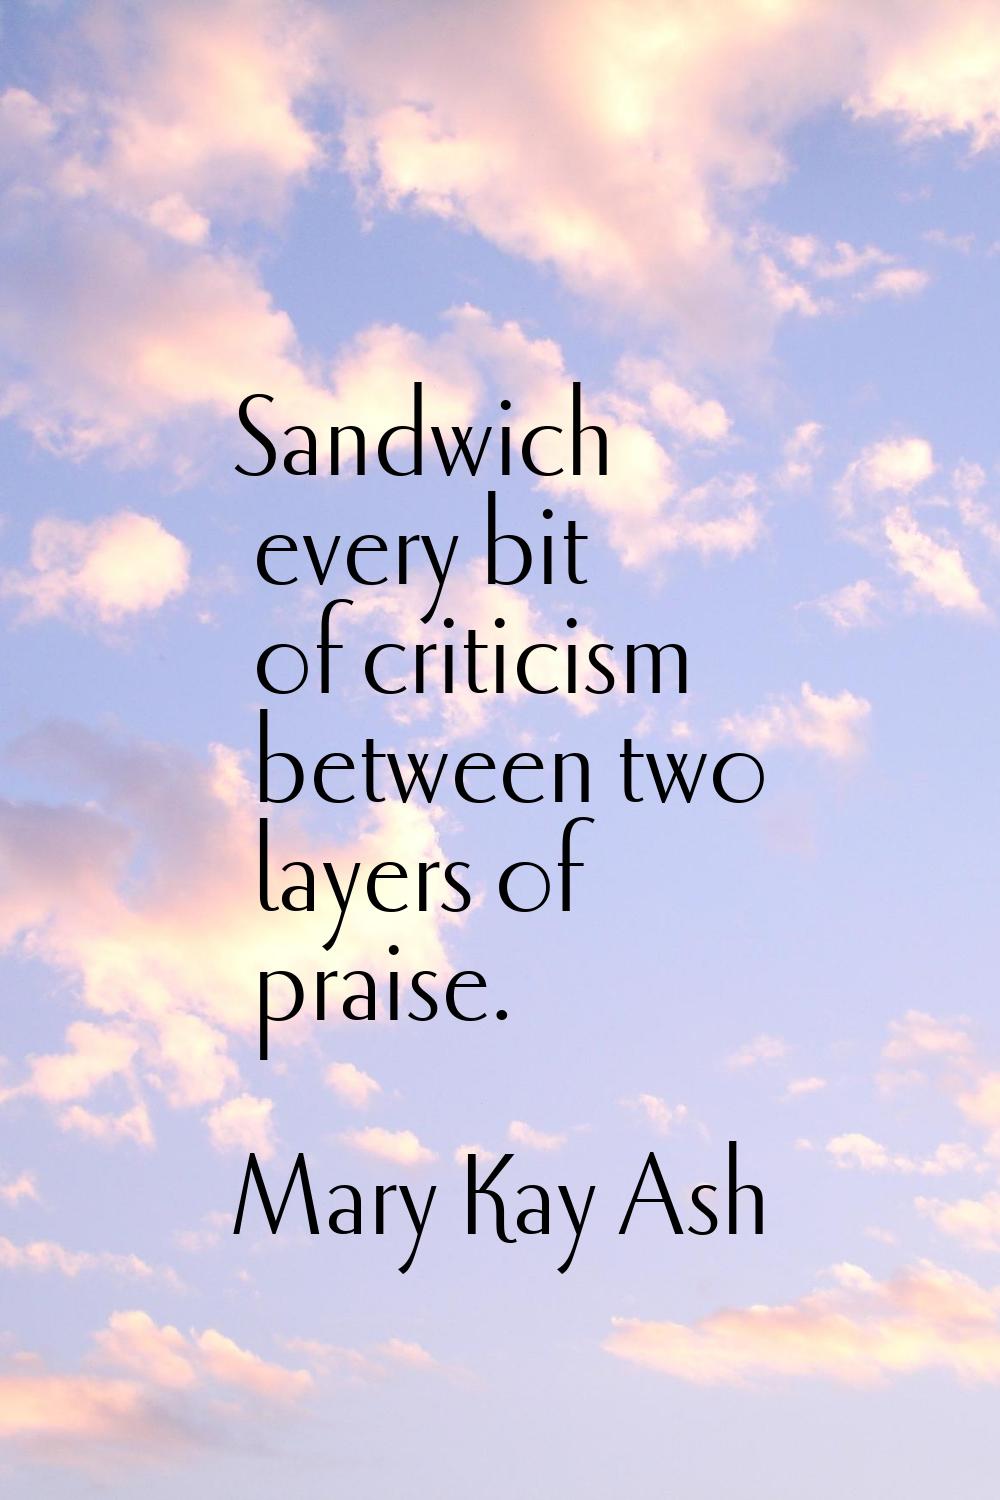 Sandwich every bit of criticism between two layers of praise.